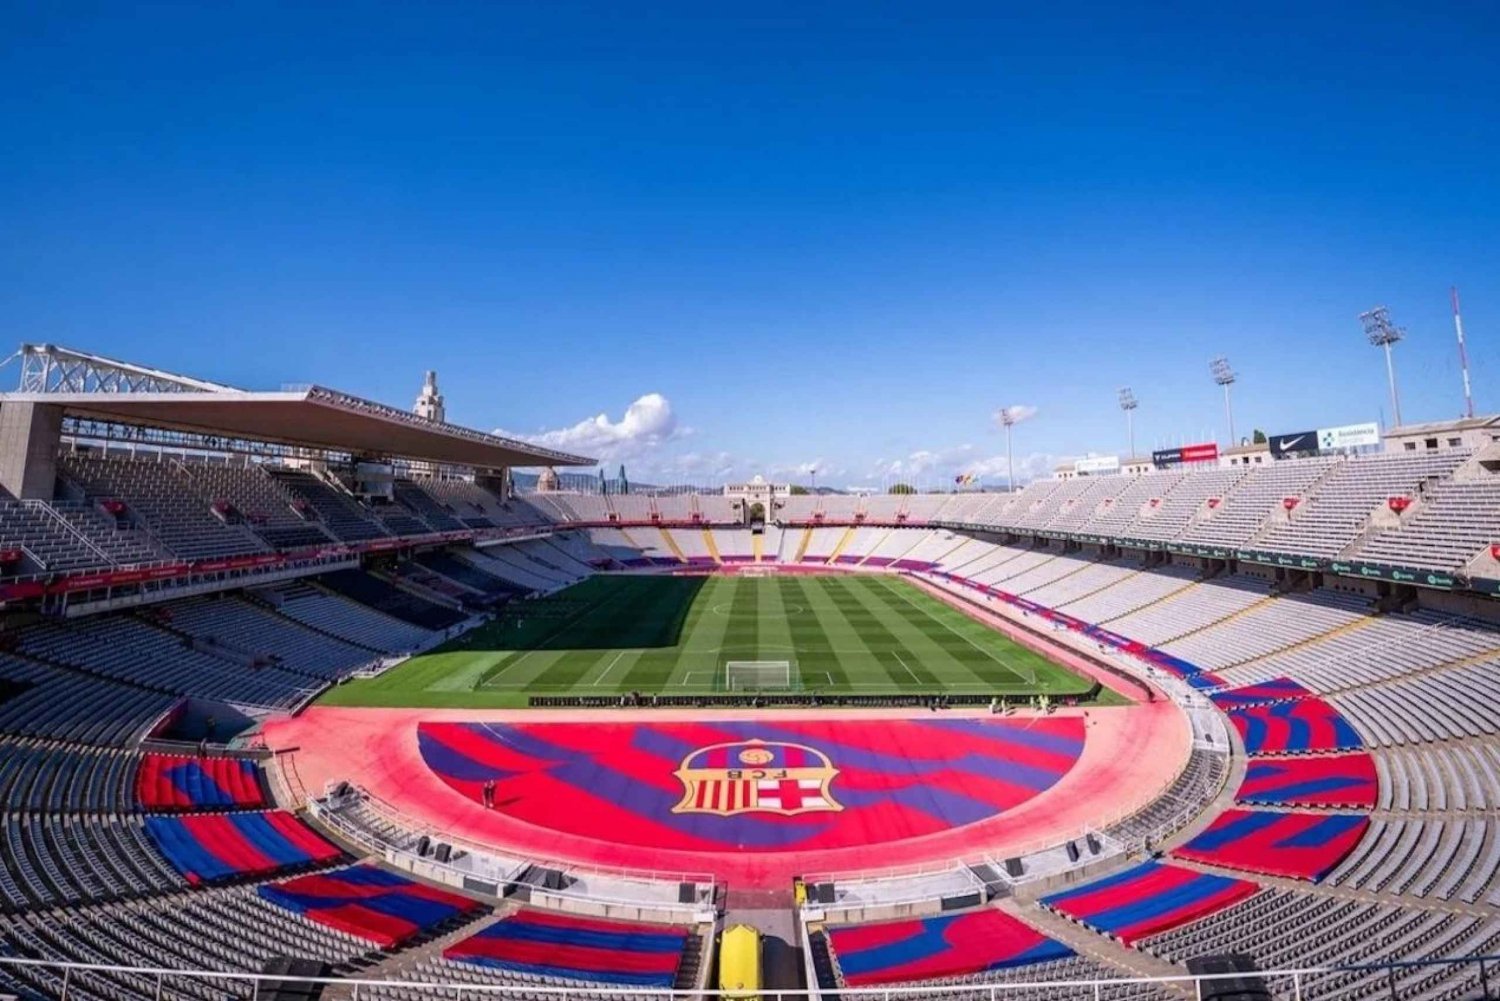 Barcelona: FC Barcelona Match Day Tour at Olympic Stadium